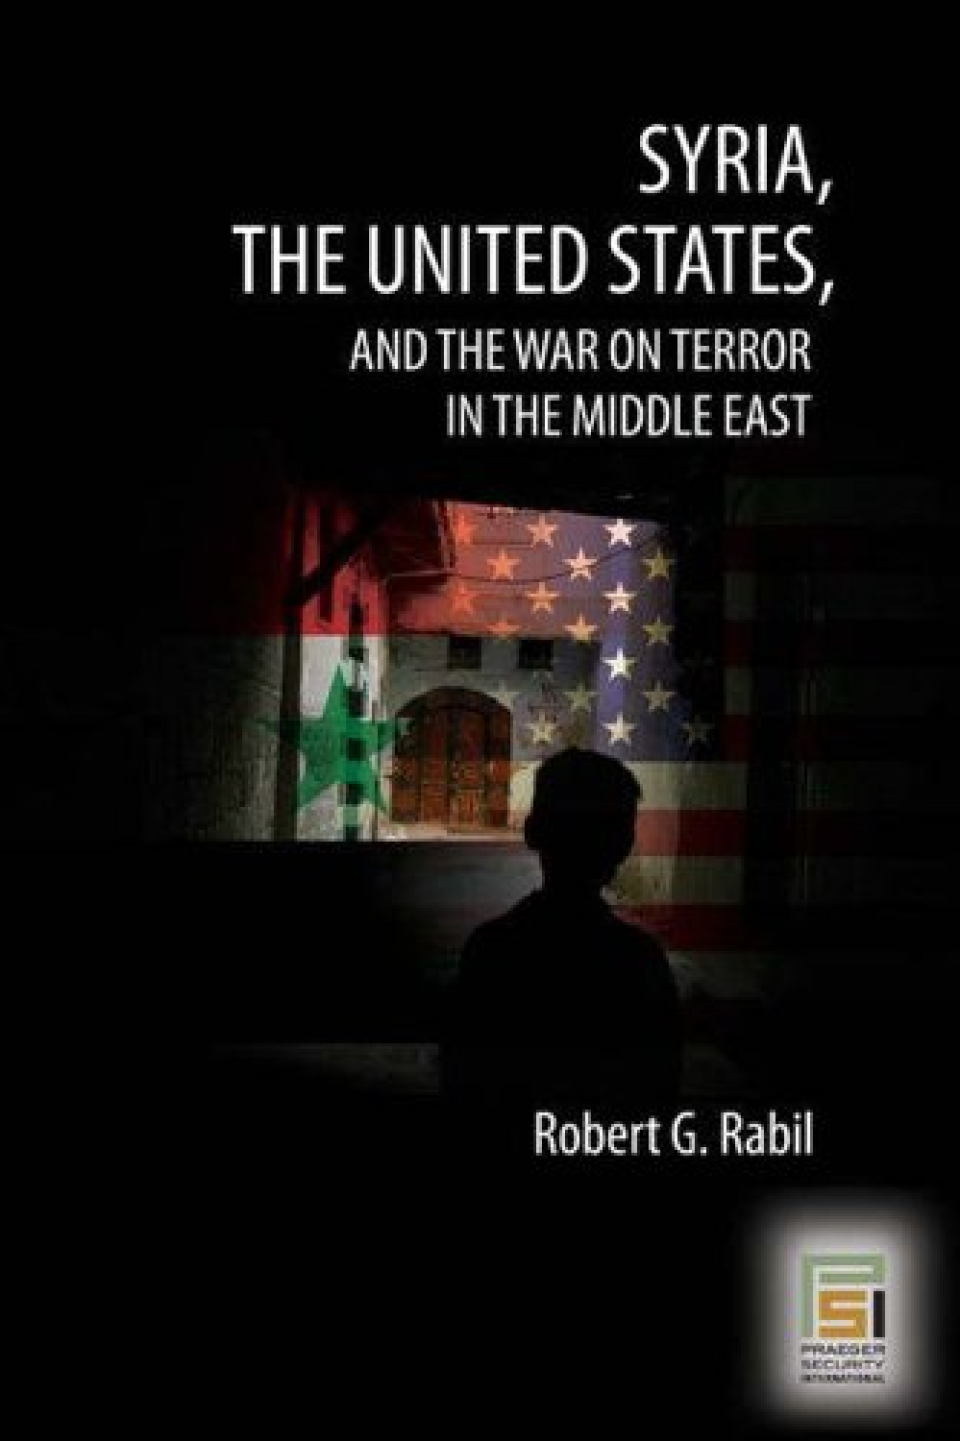 Syria, the United States, and the War on Terror in the Middle East